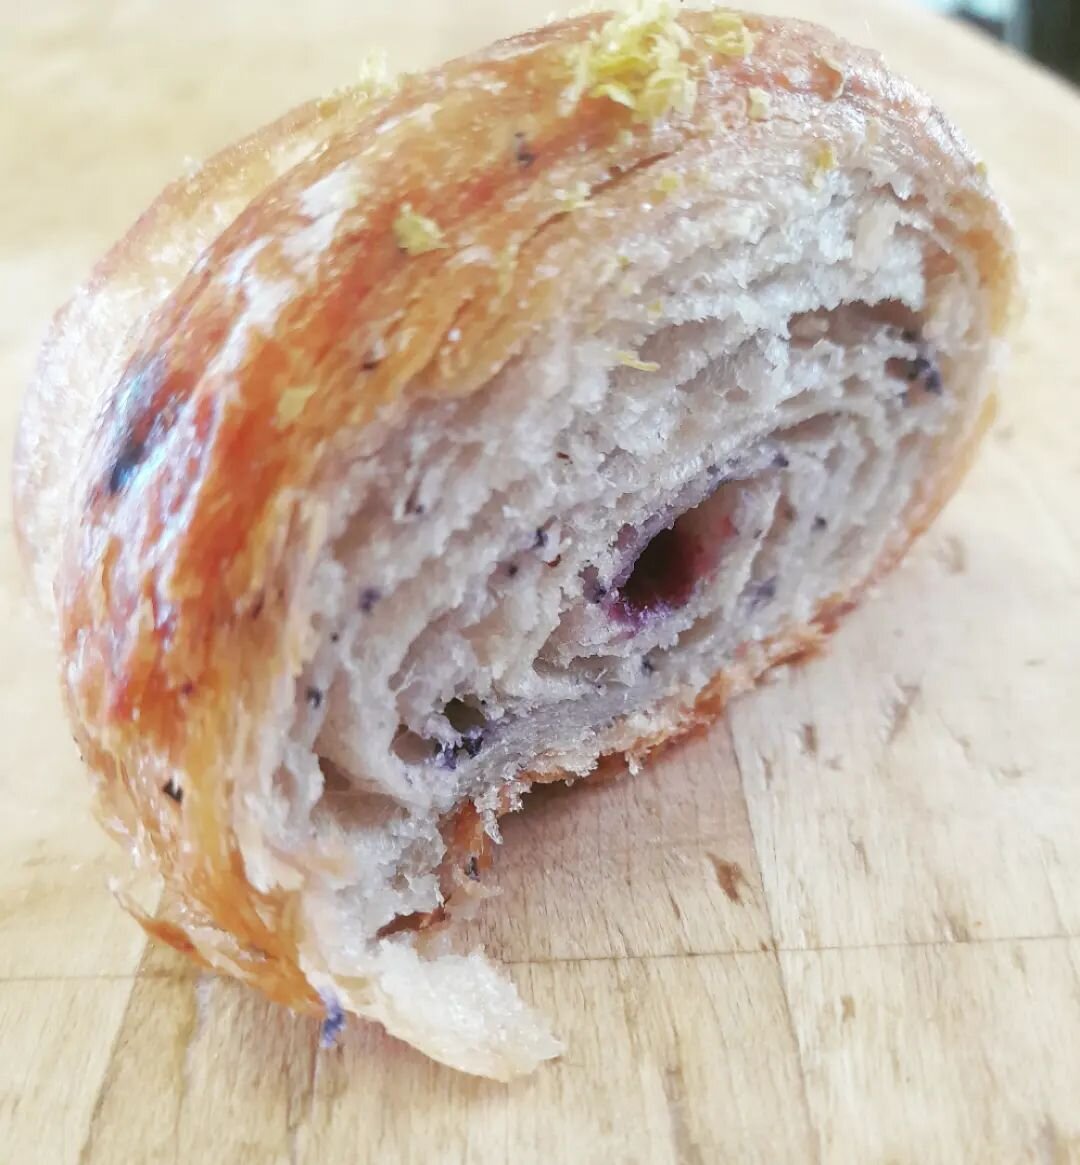 Good morning! We are open today 9-5
Sunday 11-4 
Monday 9-7 
Have you tried our lemon blueberry croissant? 
Scratch made dough layered with blueberry butter and filled with lemon curd and fresh blueberries!